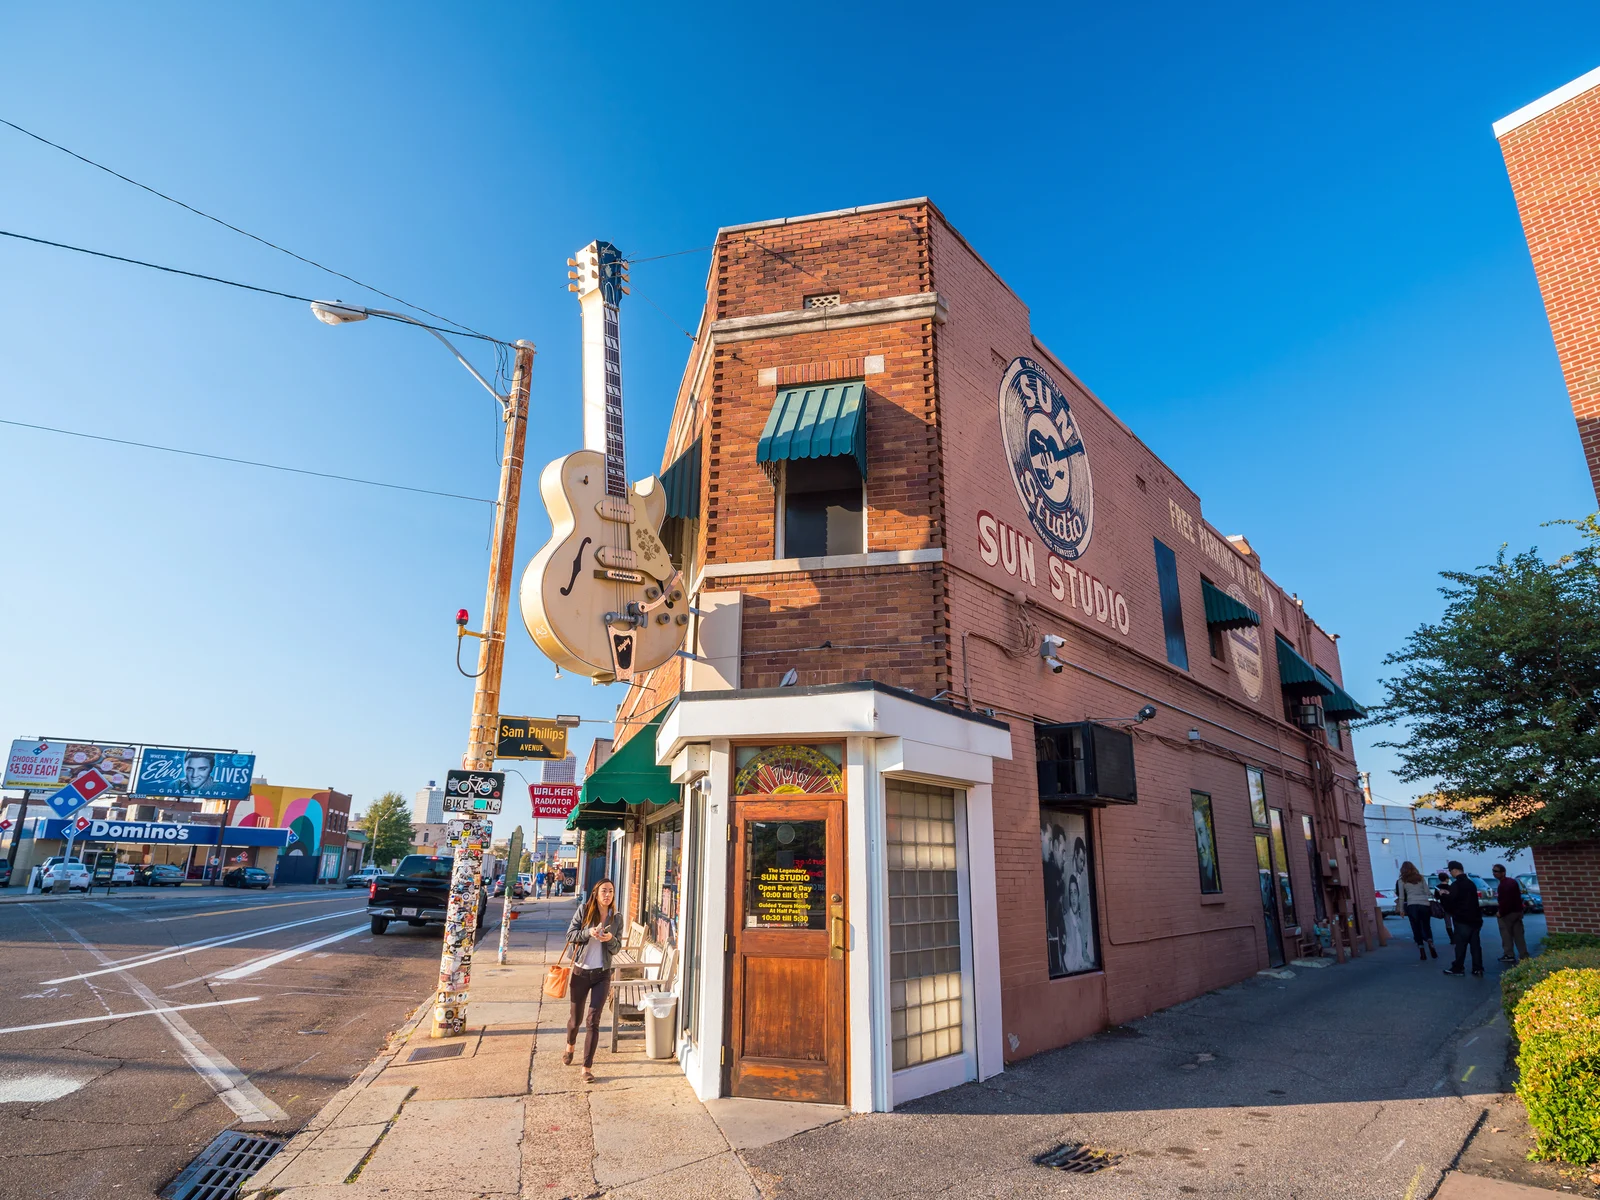 A photo of Sun Studio, titled as "The Birthplace of Rock'n'roll" with its giant guitar hanging above the entrance, alongside an empty street as a piece on the best things to do in Tennessee